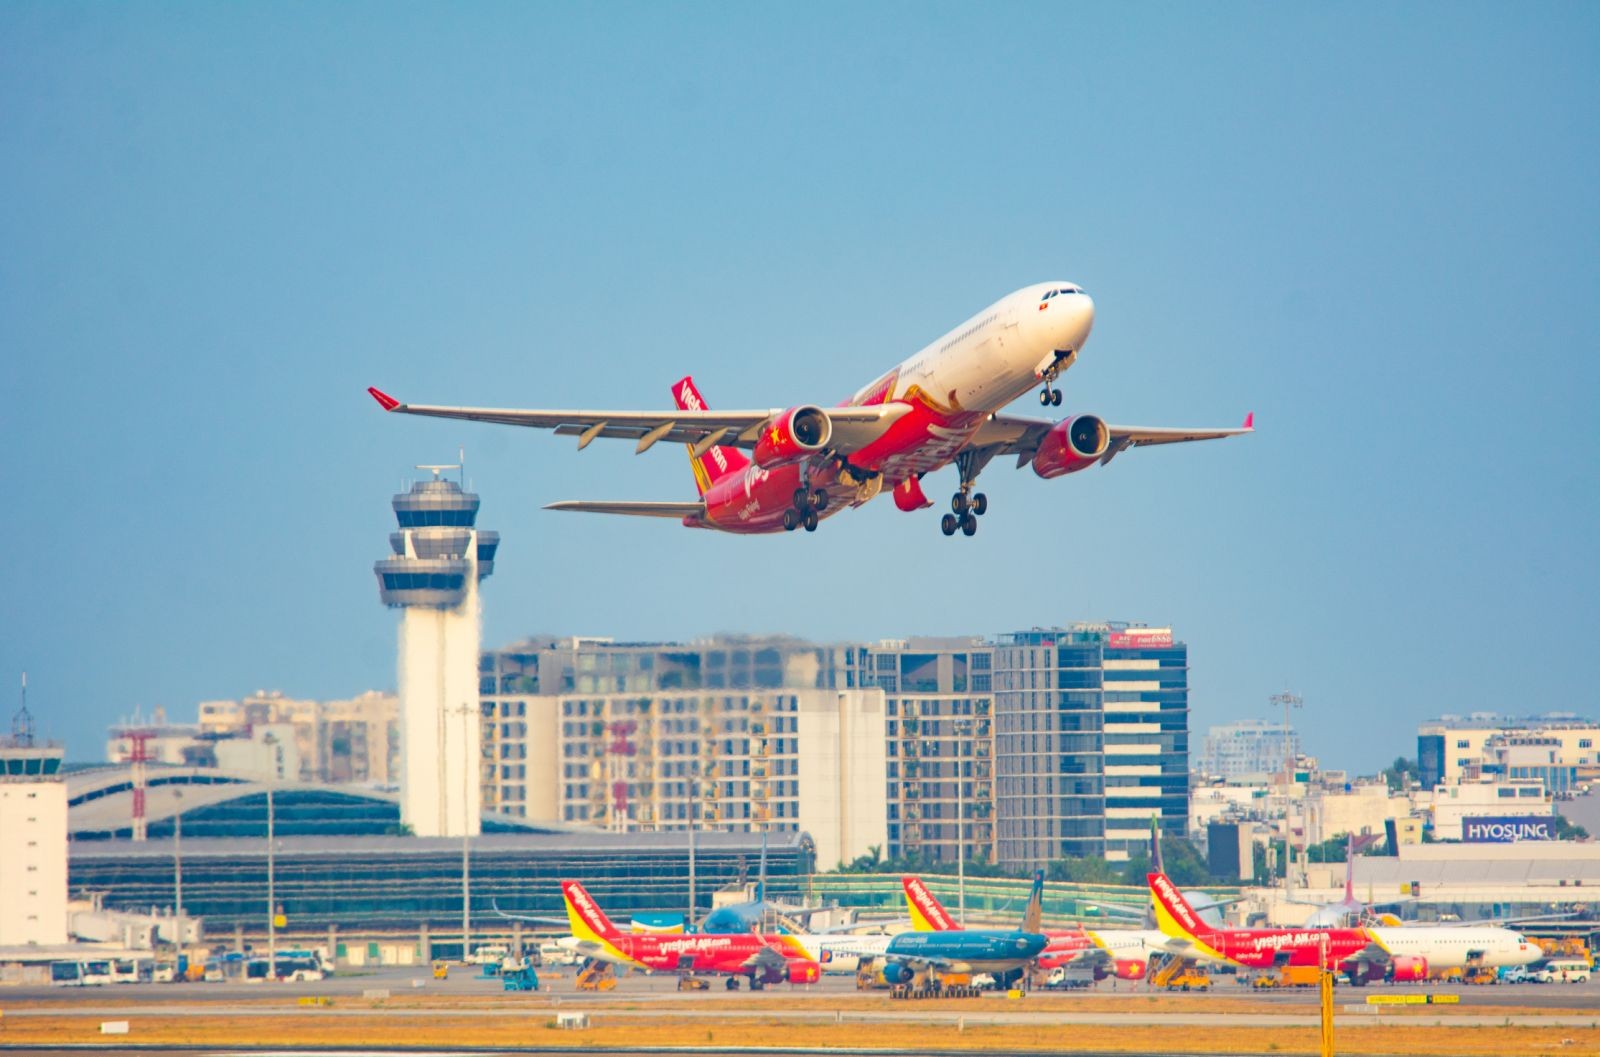 P3  A Vietjet Aircraft Is Taking Off